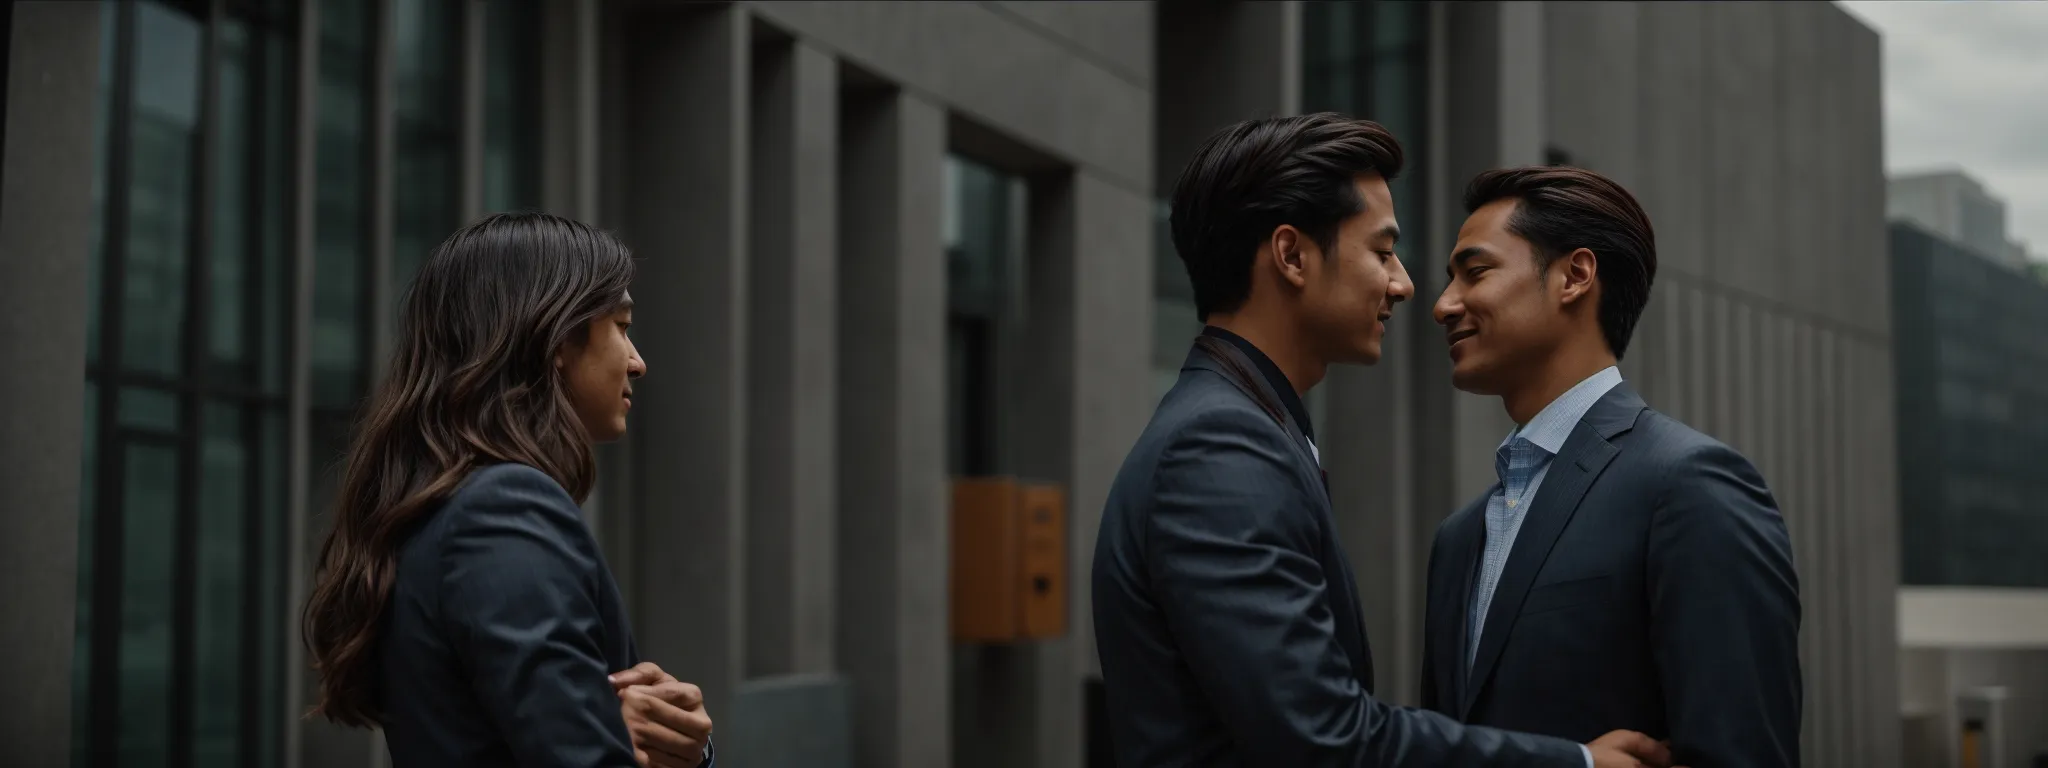 a firm handshake between two business professionals in front of a modern office building.